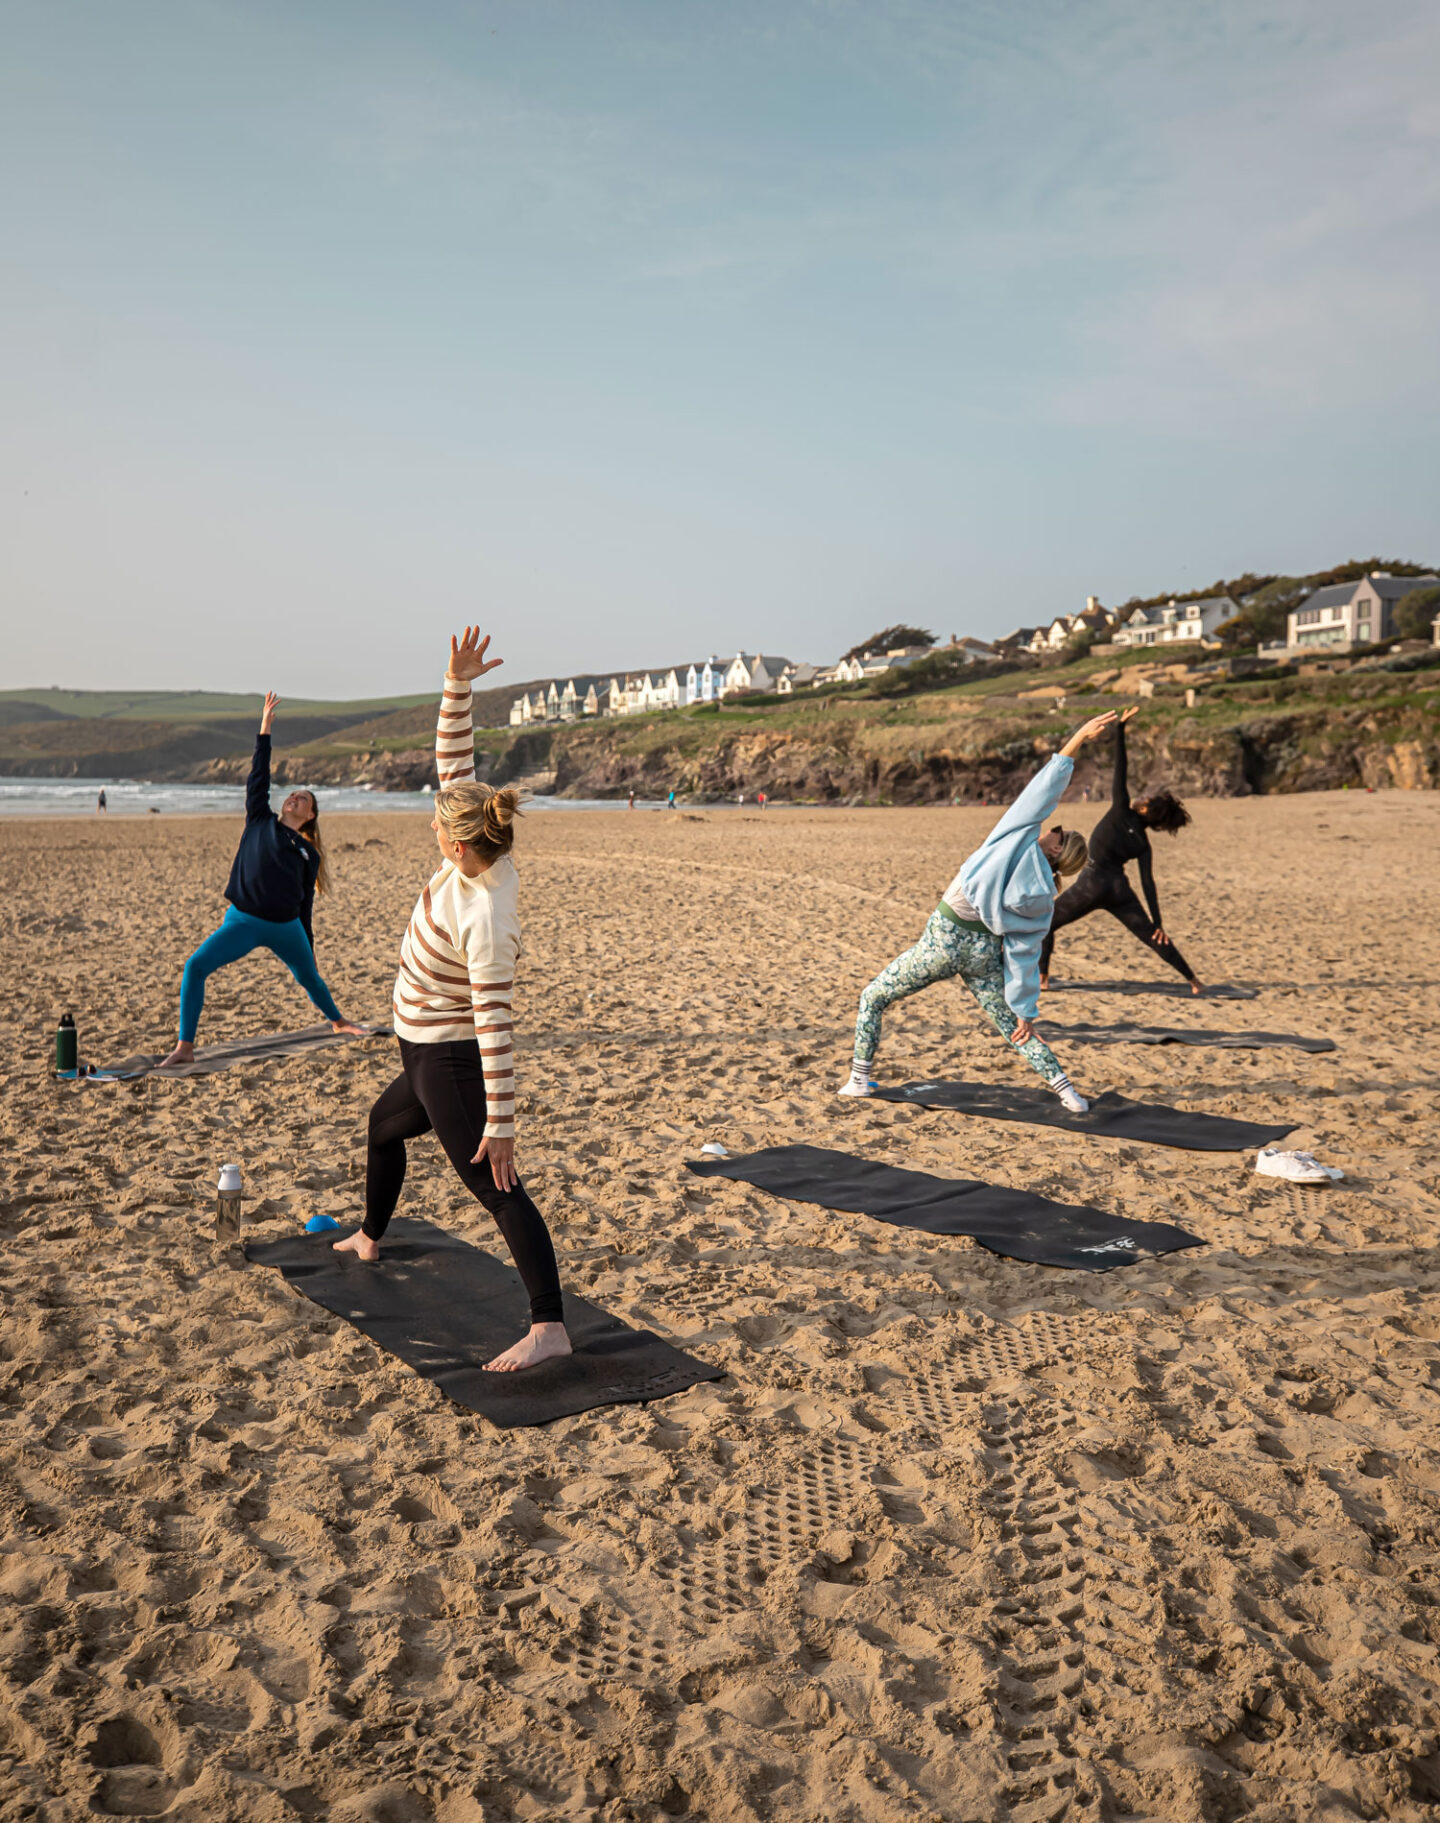 A group of people practicing yoga on a sandy beach in Cornwall, performing stretches and poses on yoga mats. The beach is expansive and tranquil, with gentle waves in the background and picturesque cliffs topped with charming houses. The clear sky and calm atmosphere create an ideal setting for a relaxing and invigorating outdoor yoga session.